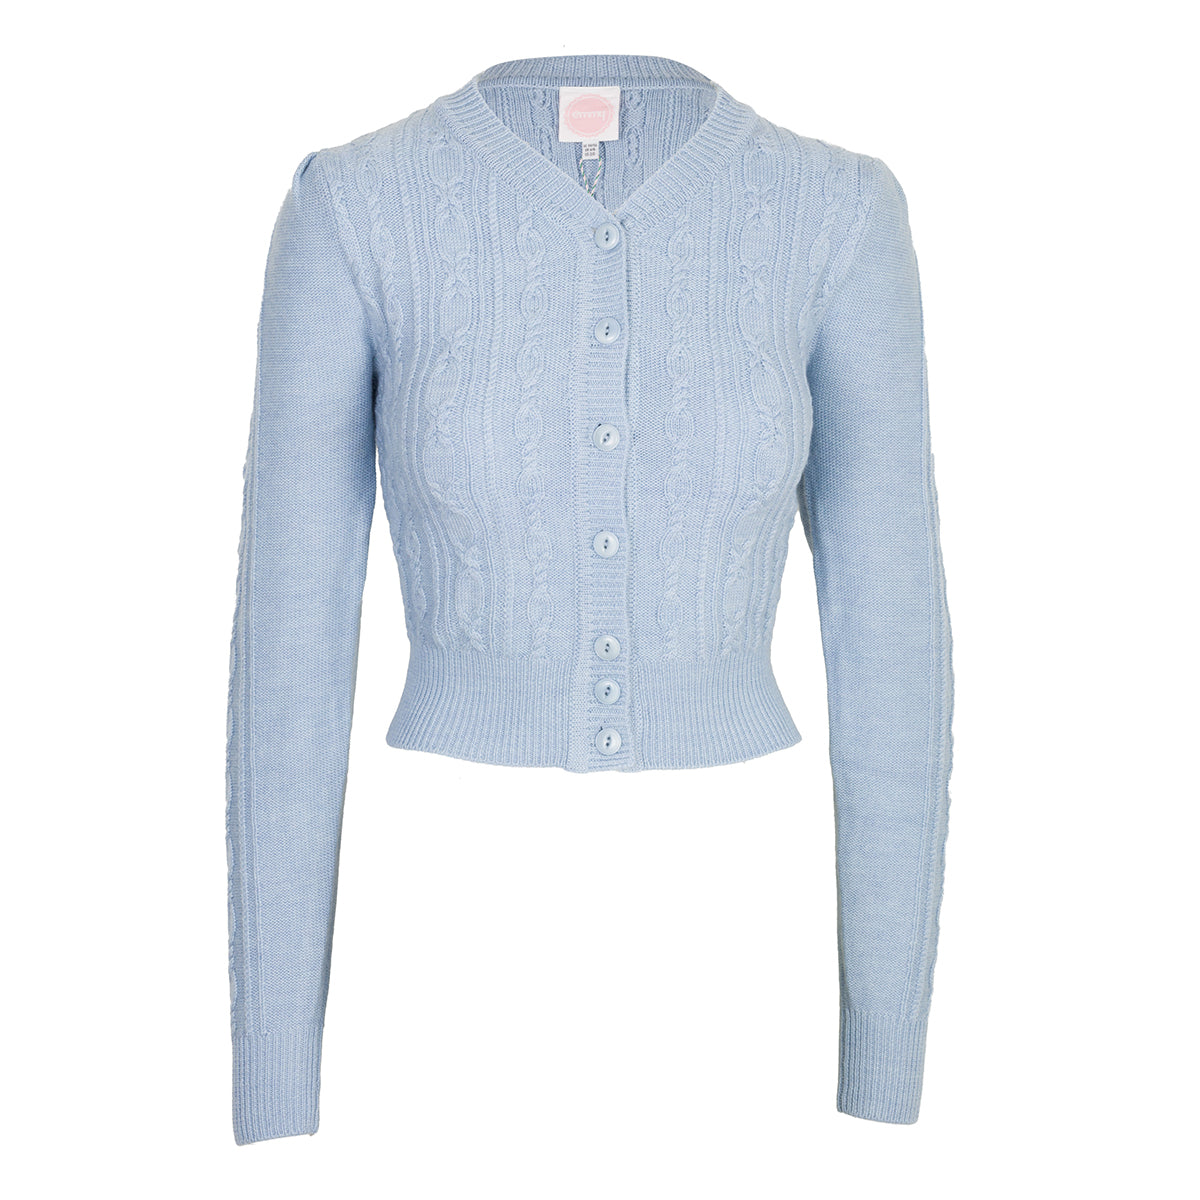 Emmy Design Icy Blue Ice Skater Cardigan Front